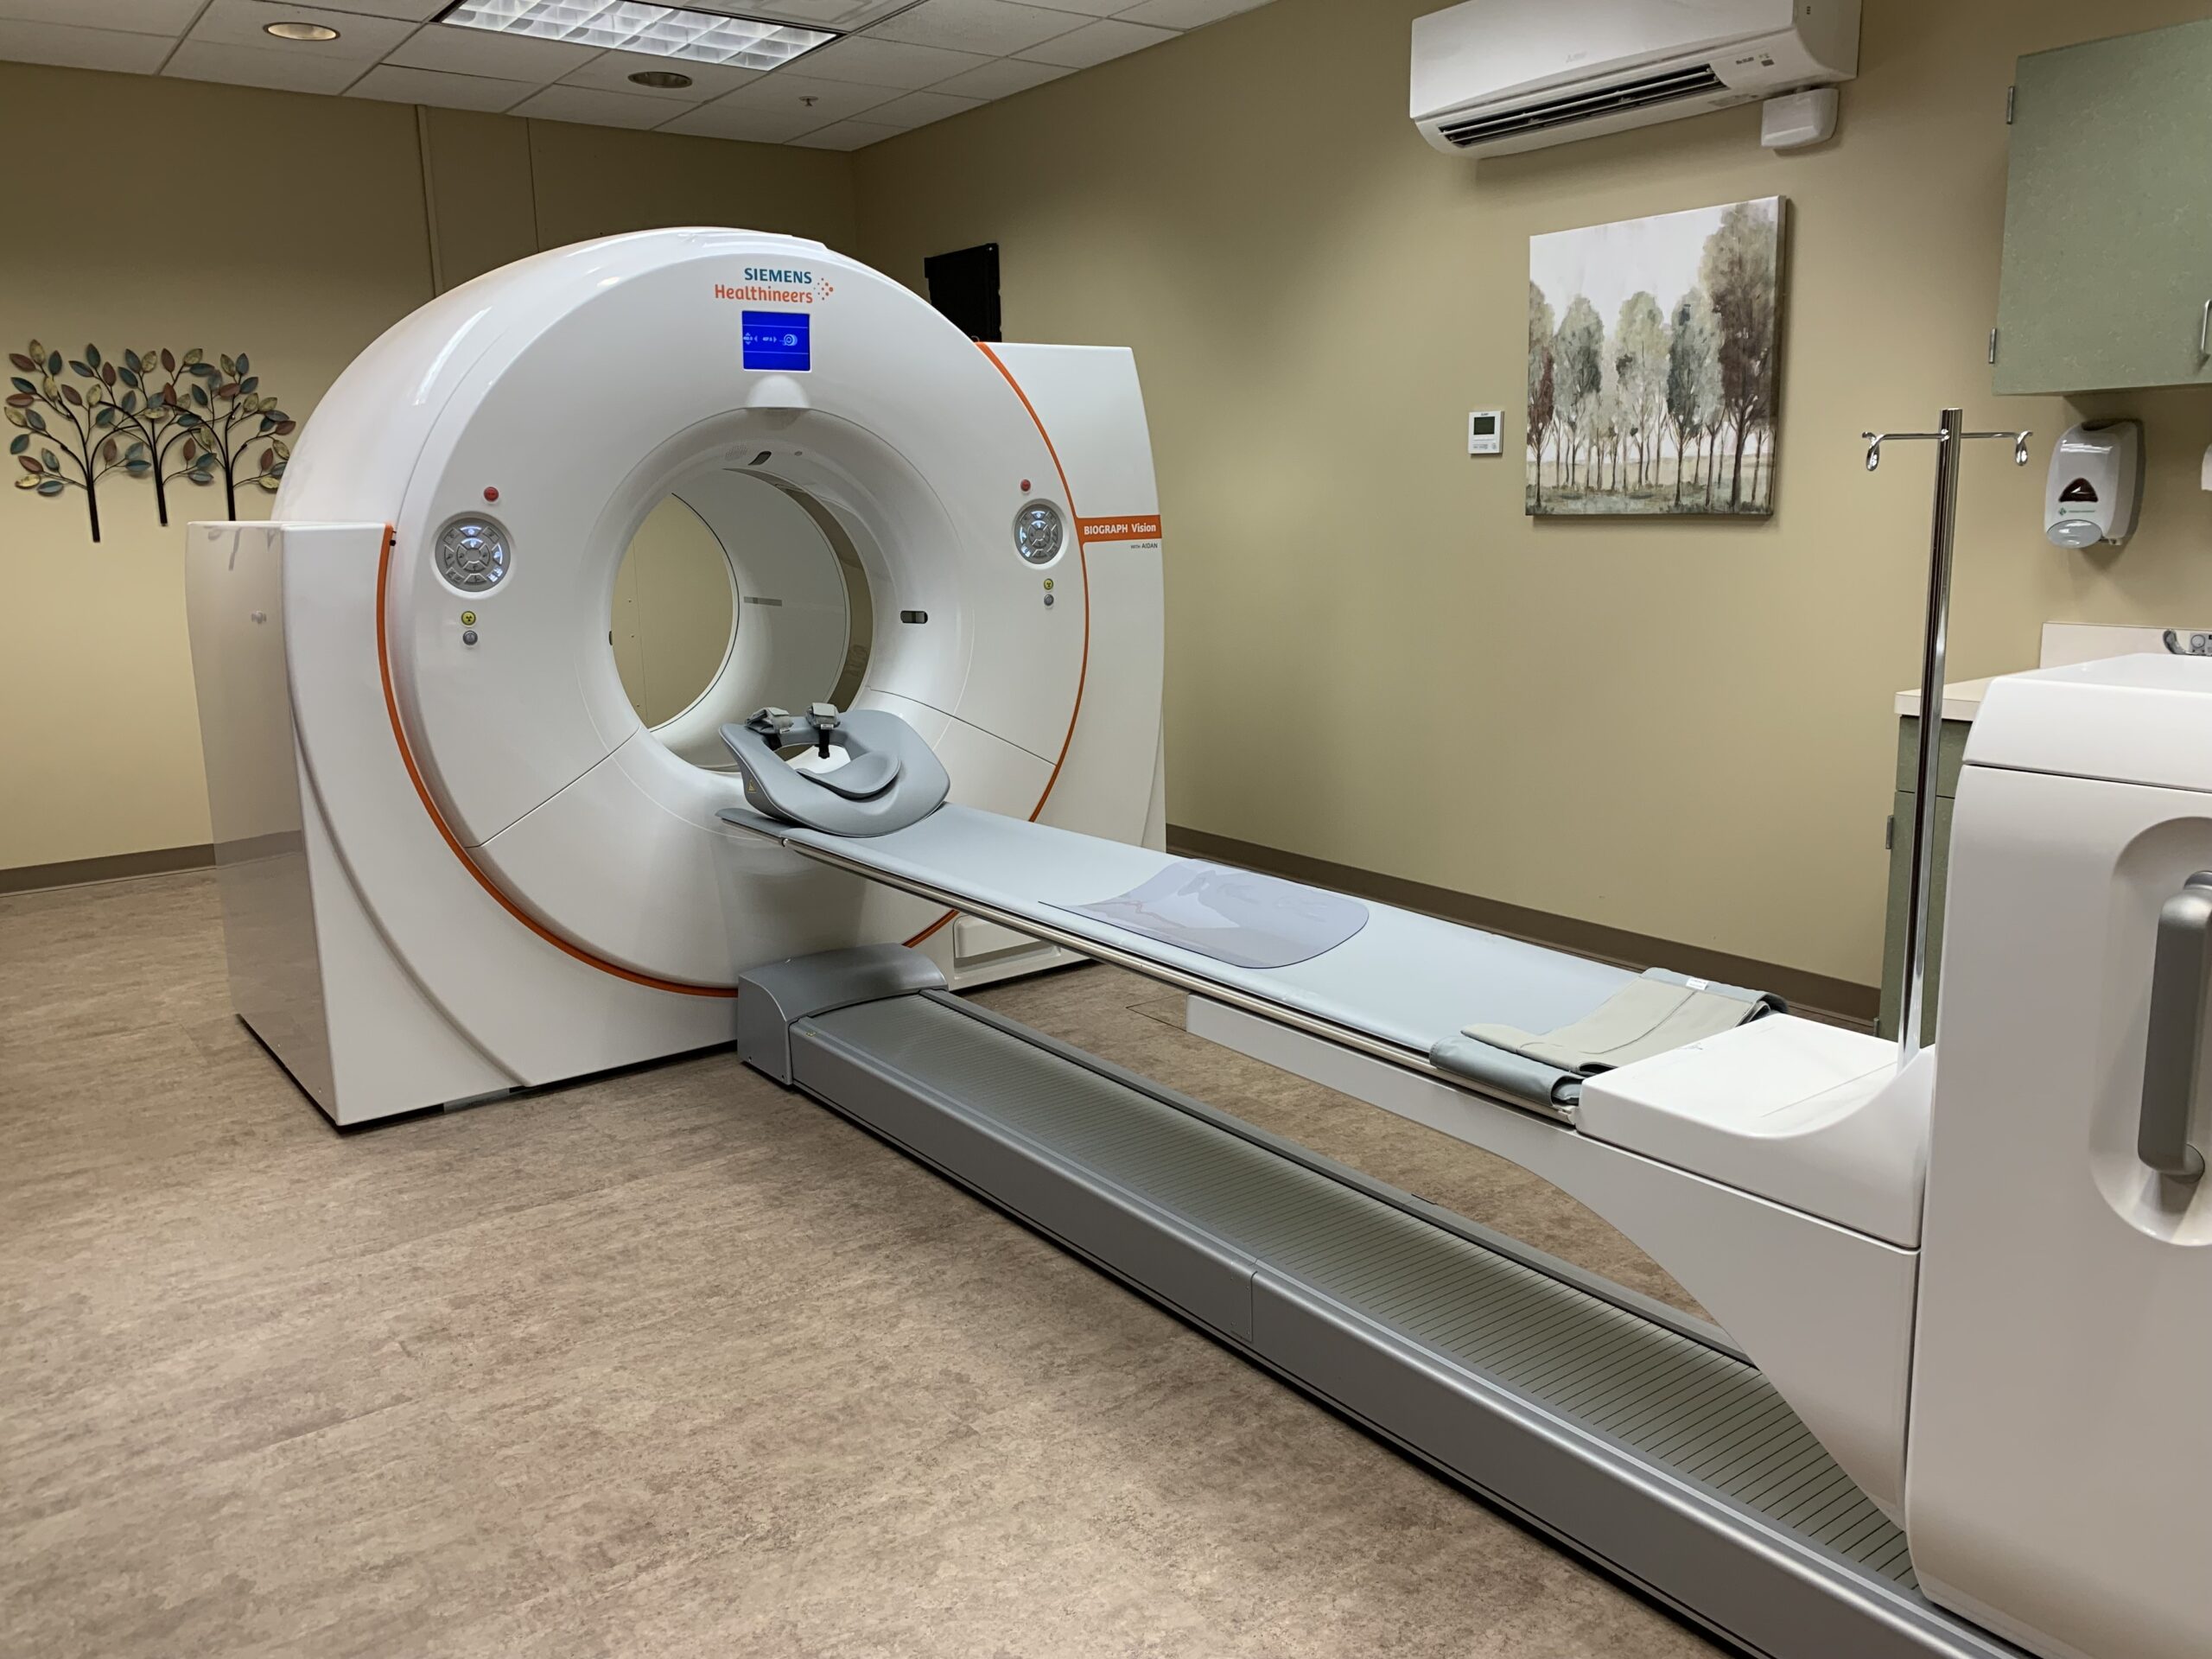 New Imaging Technology at Windsong Radiology